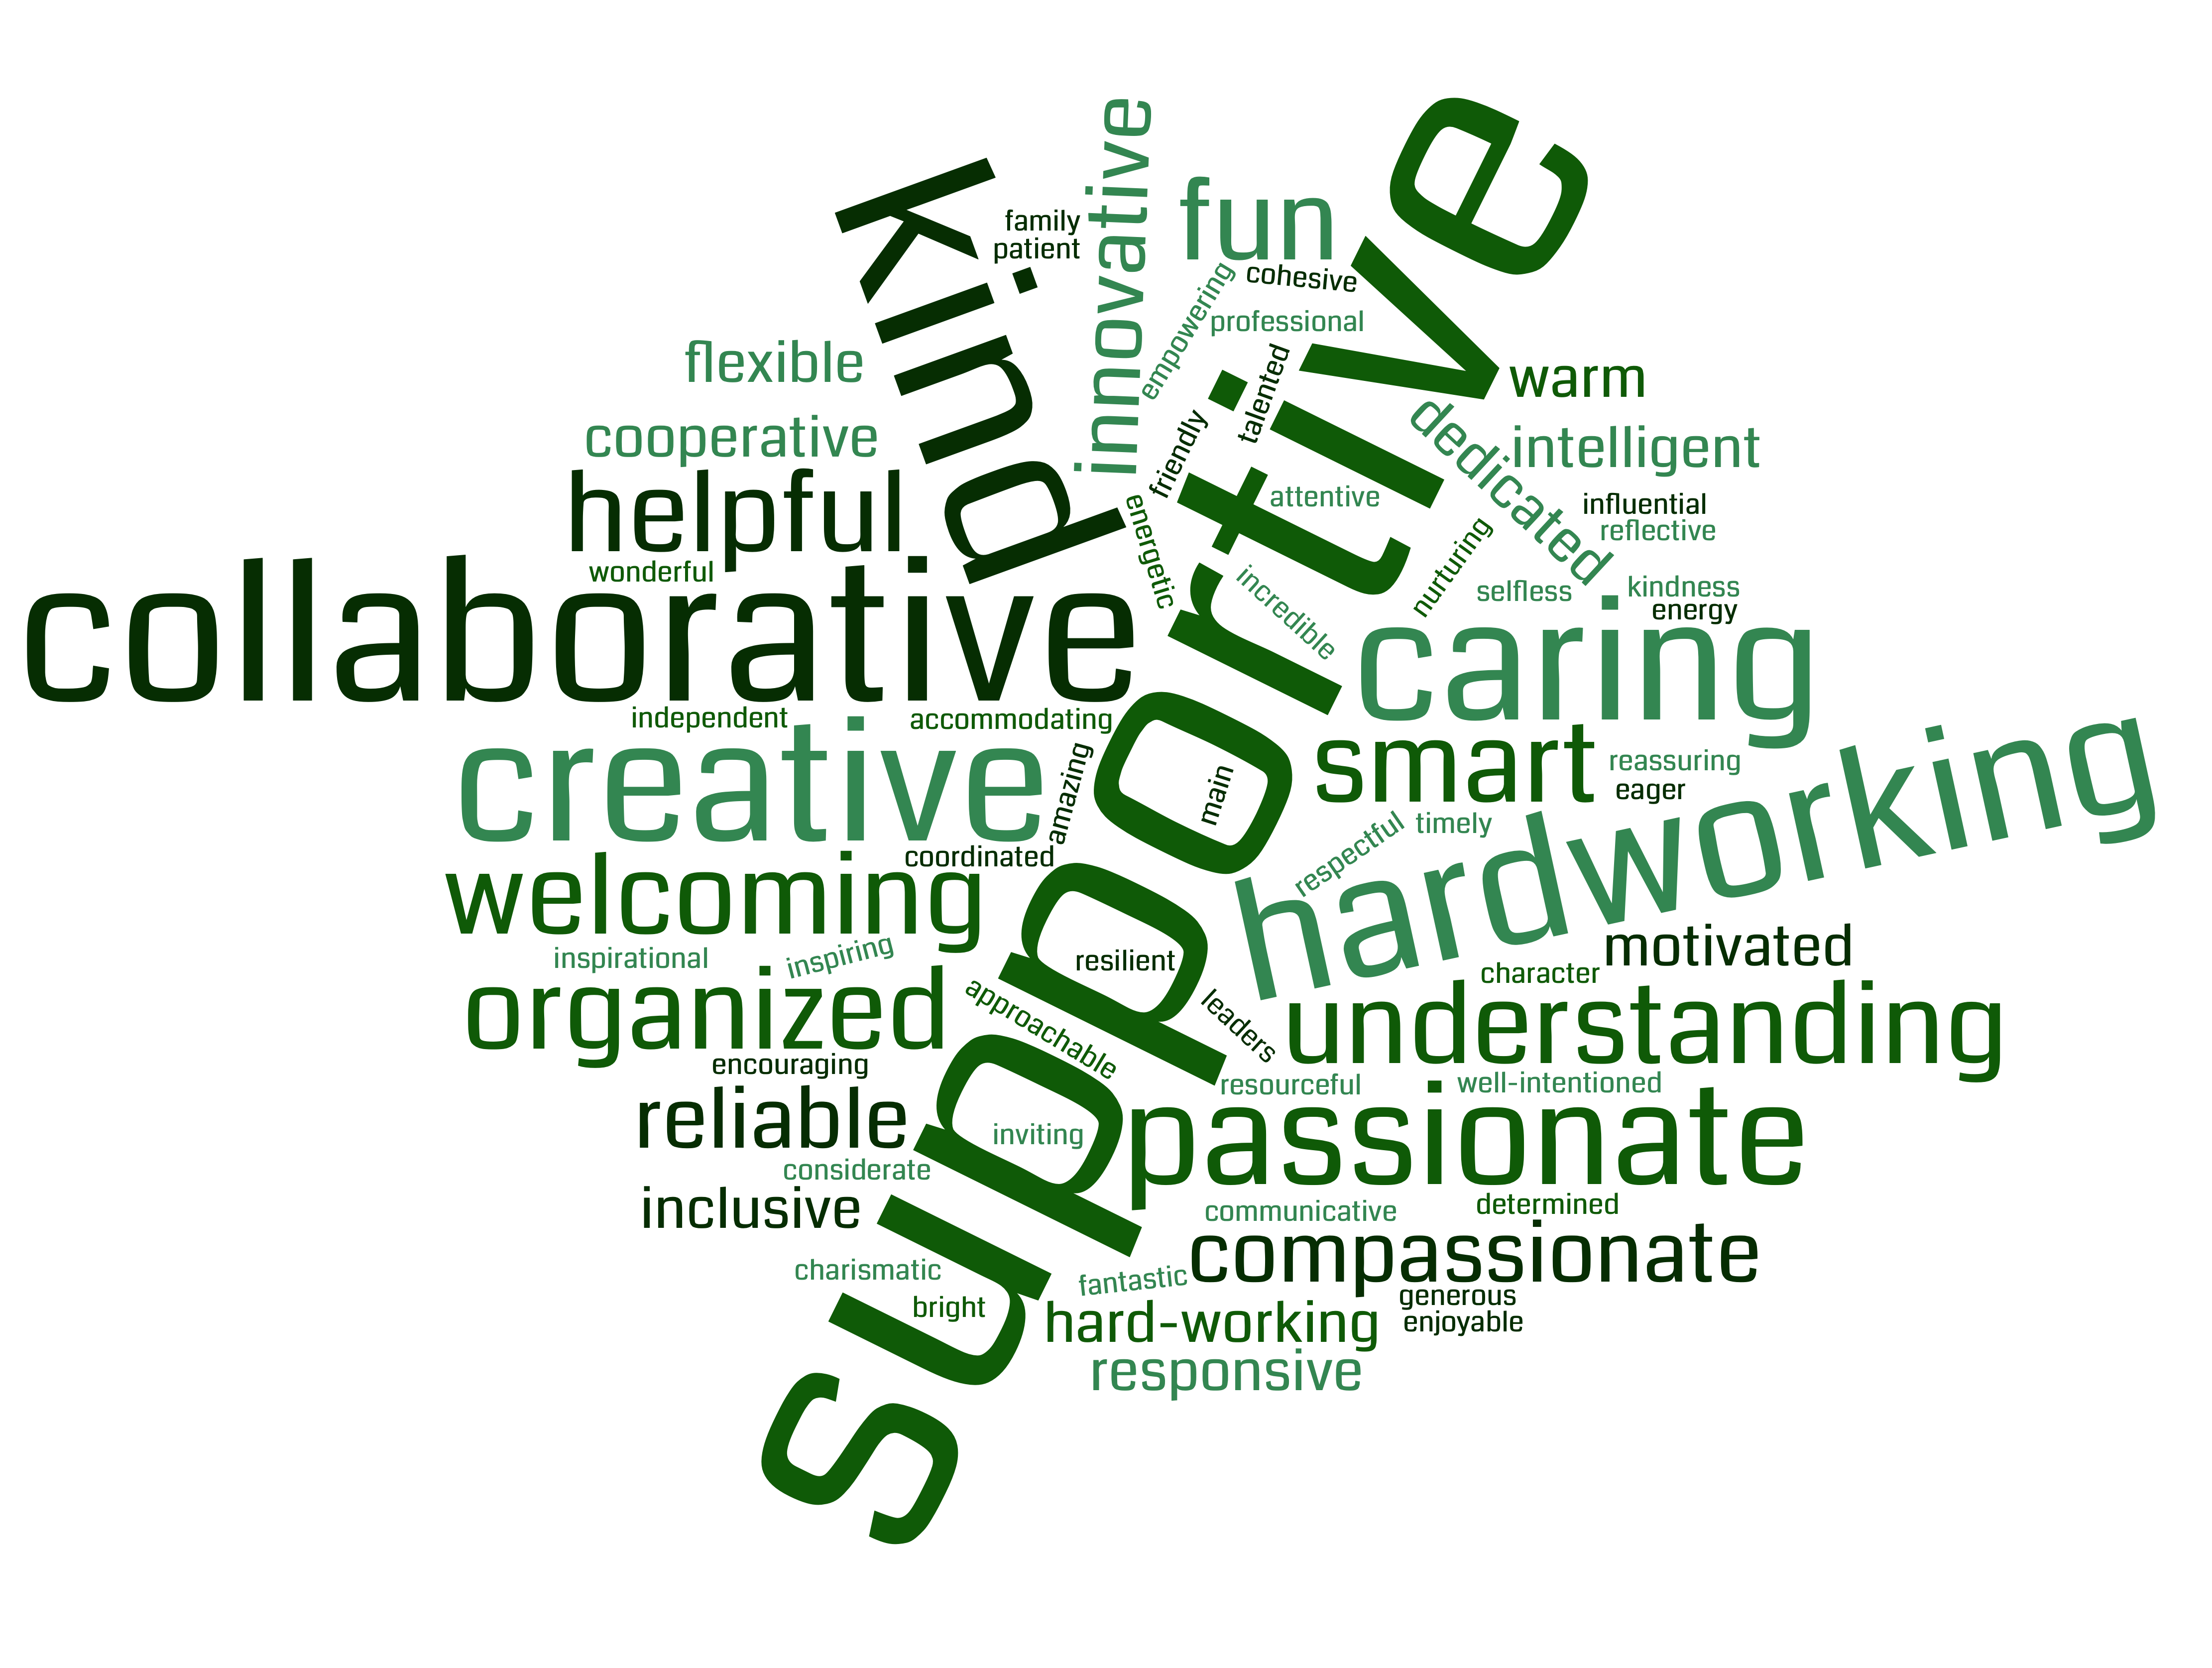 word cloud of GSS Leader descriptive words, including supportive, kind, collaborative, hardworking